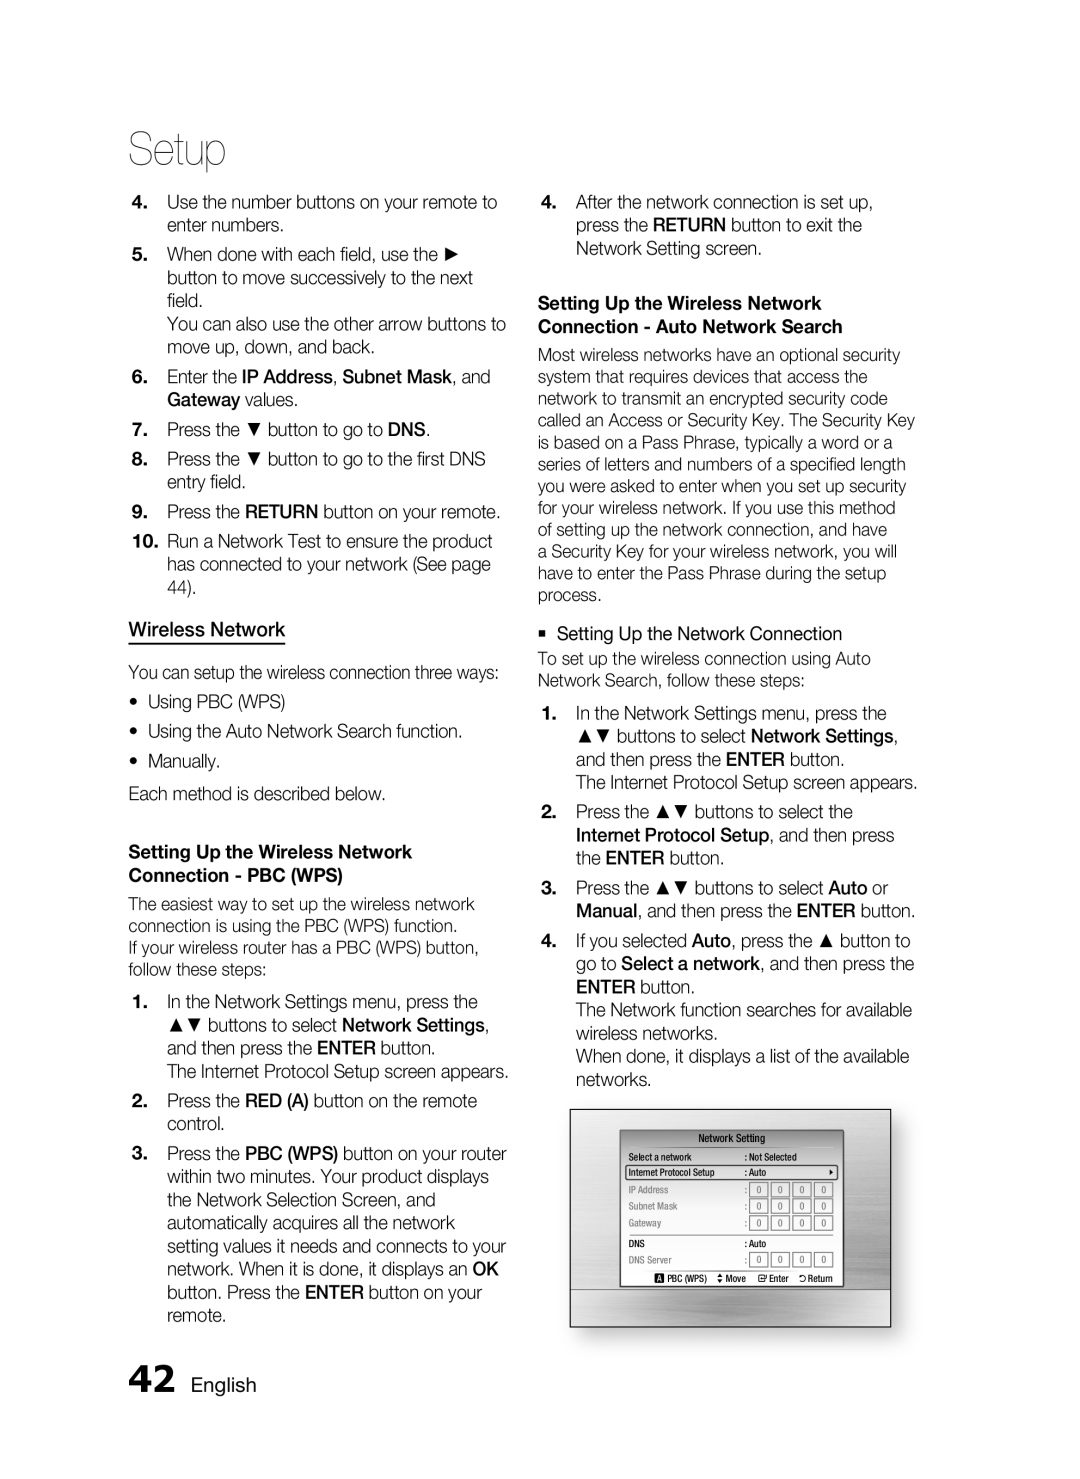 Samsung C6600 user manual English, Setup, Setting Up the Wireless Network, Connection - PBC WPS 